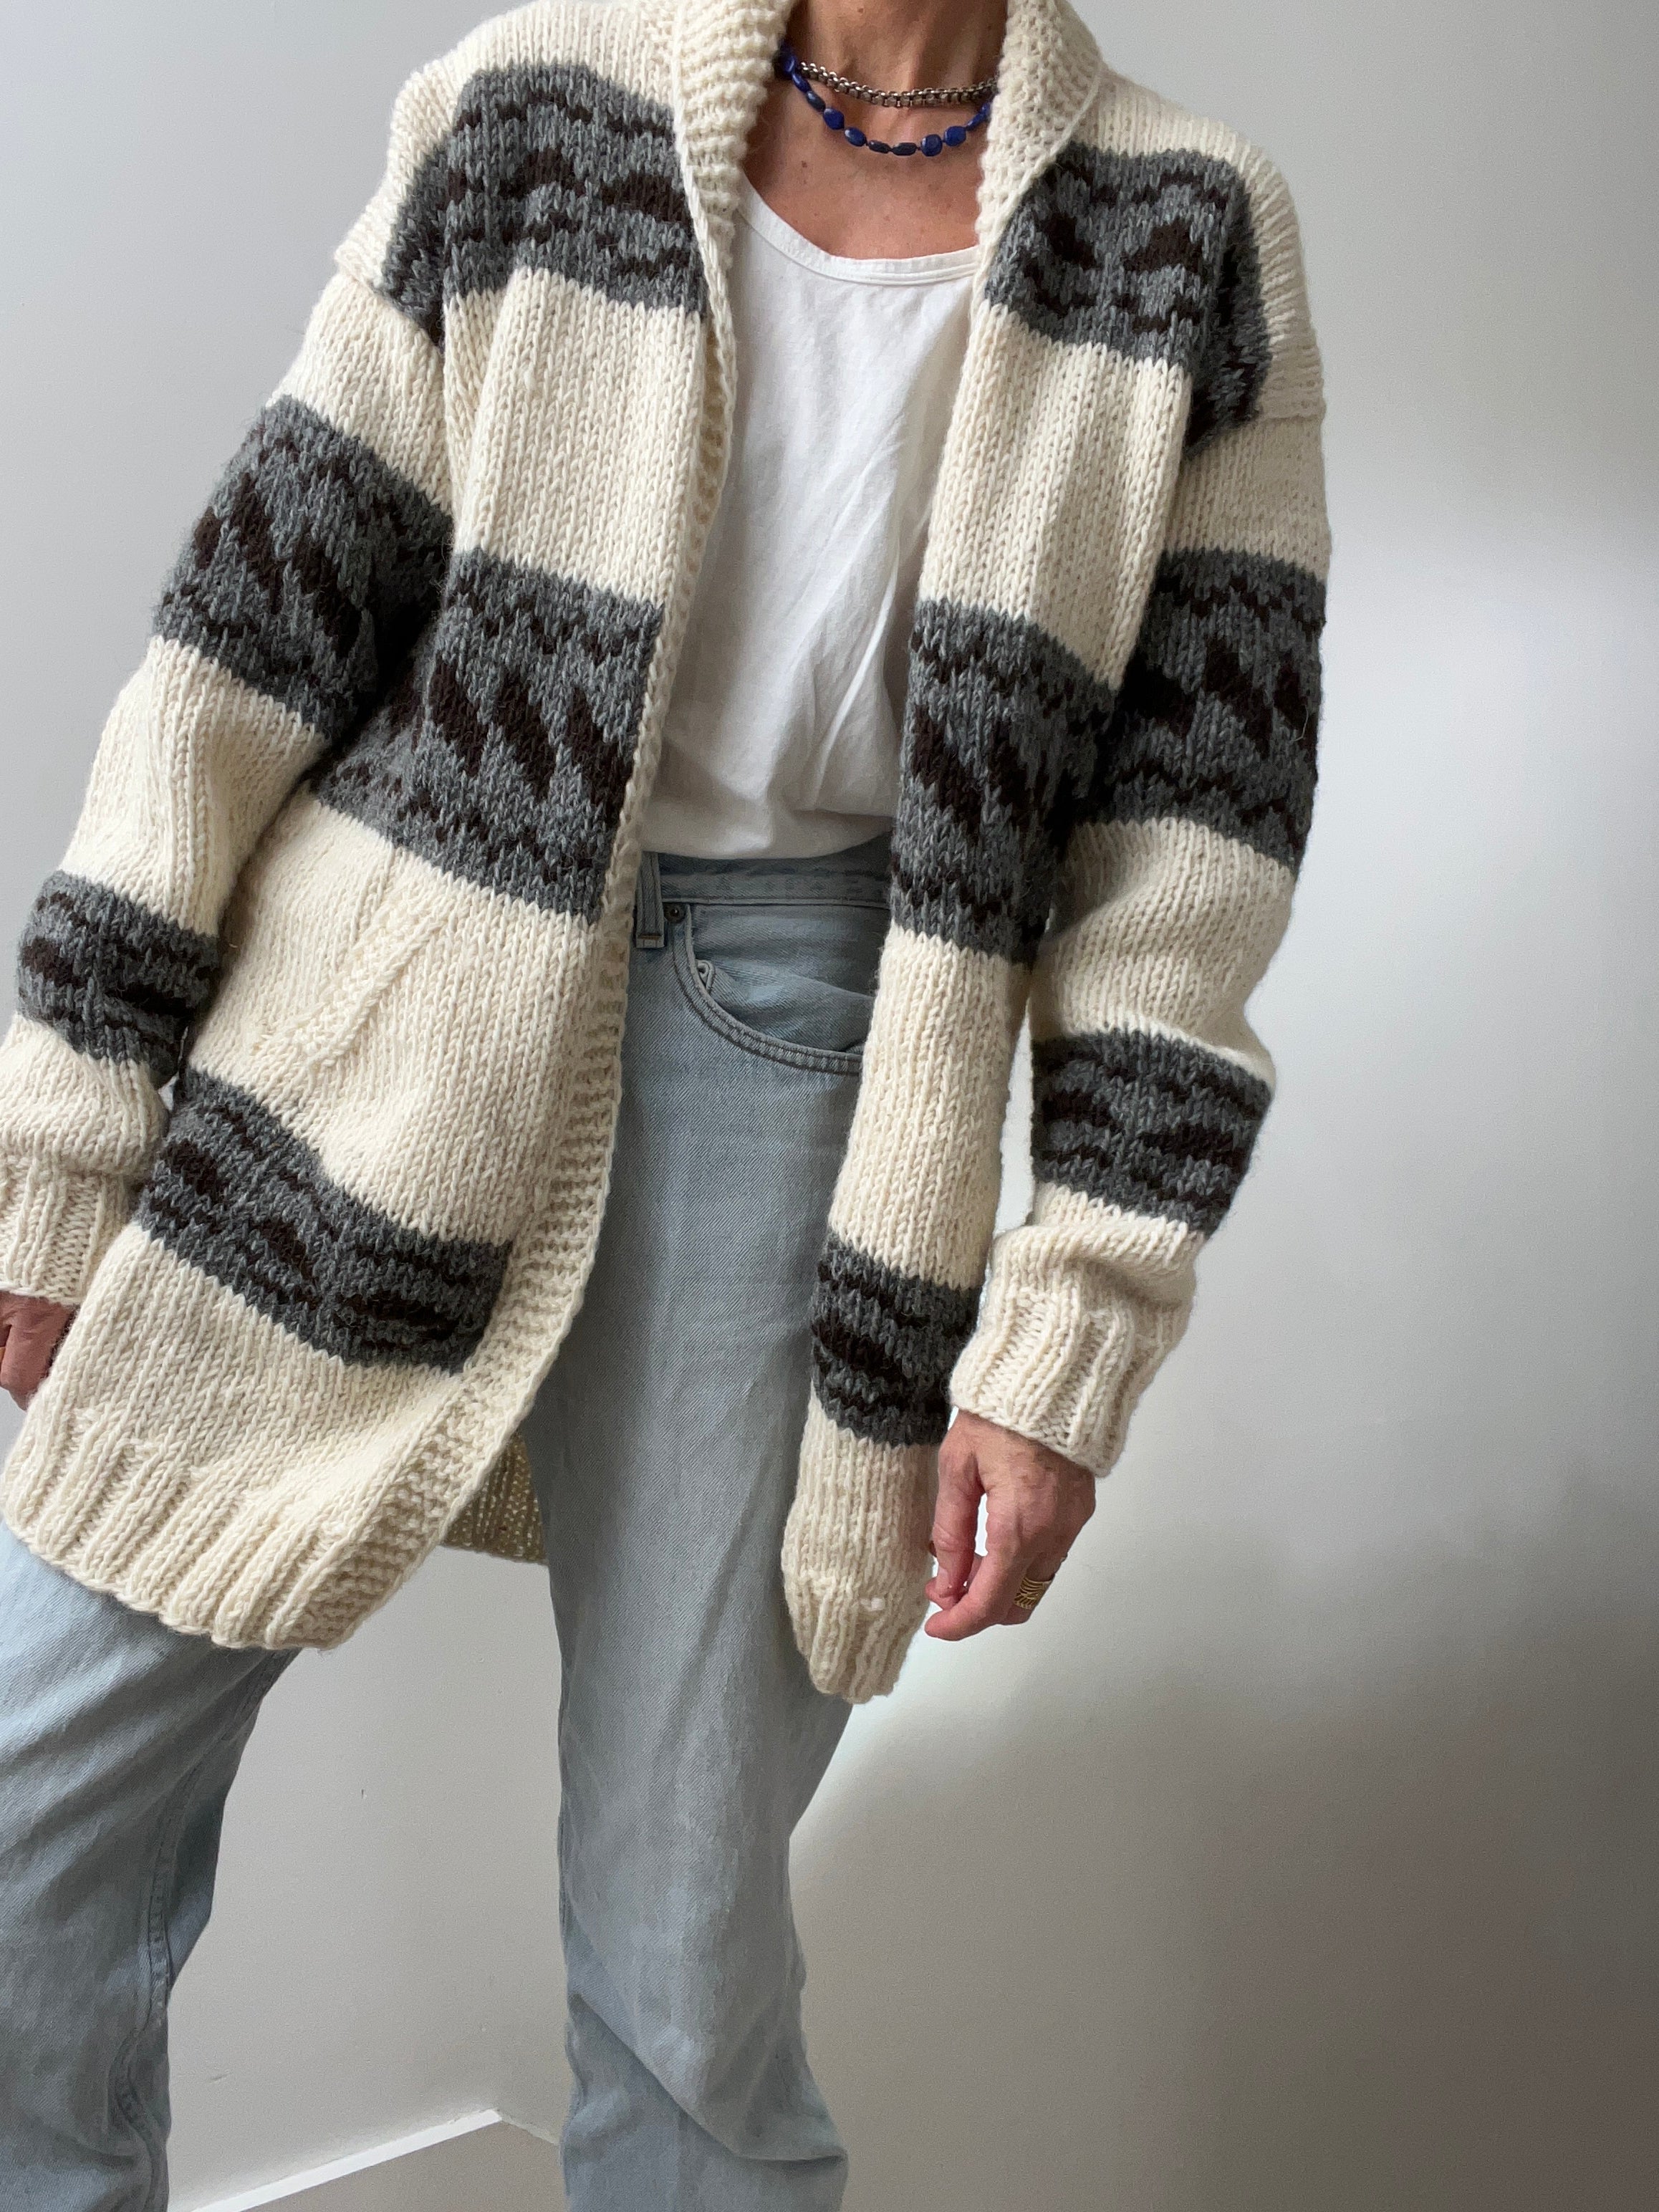 Not specified Cardigans Small - Large Shawl Collar Handknit Cardigan